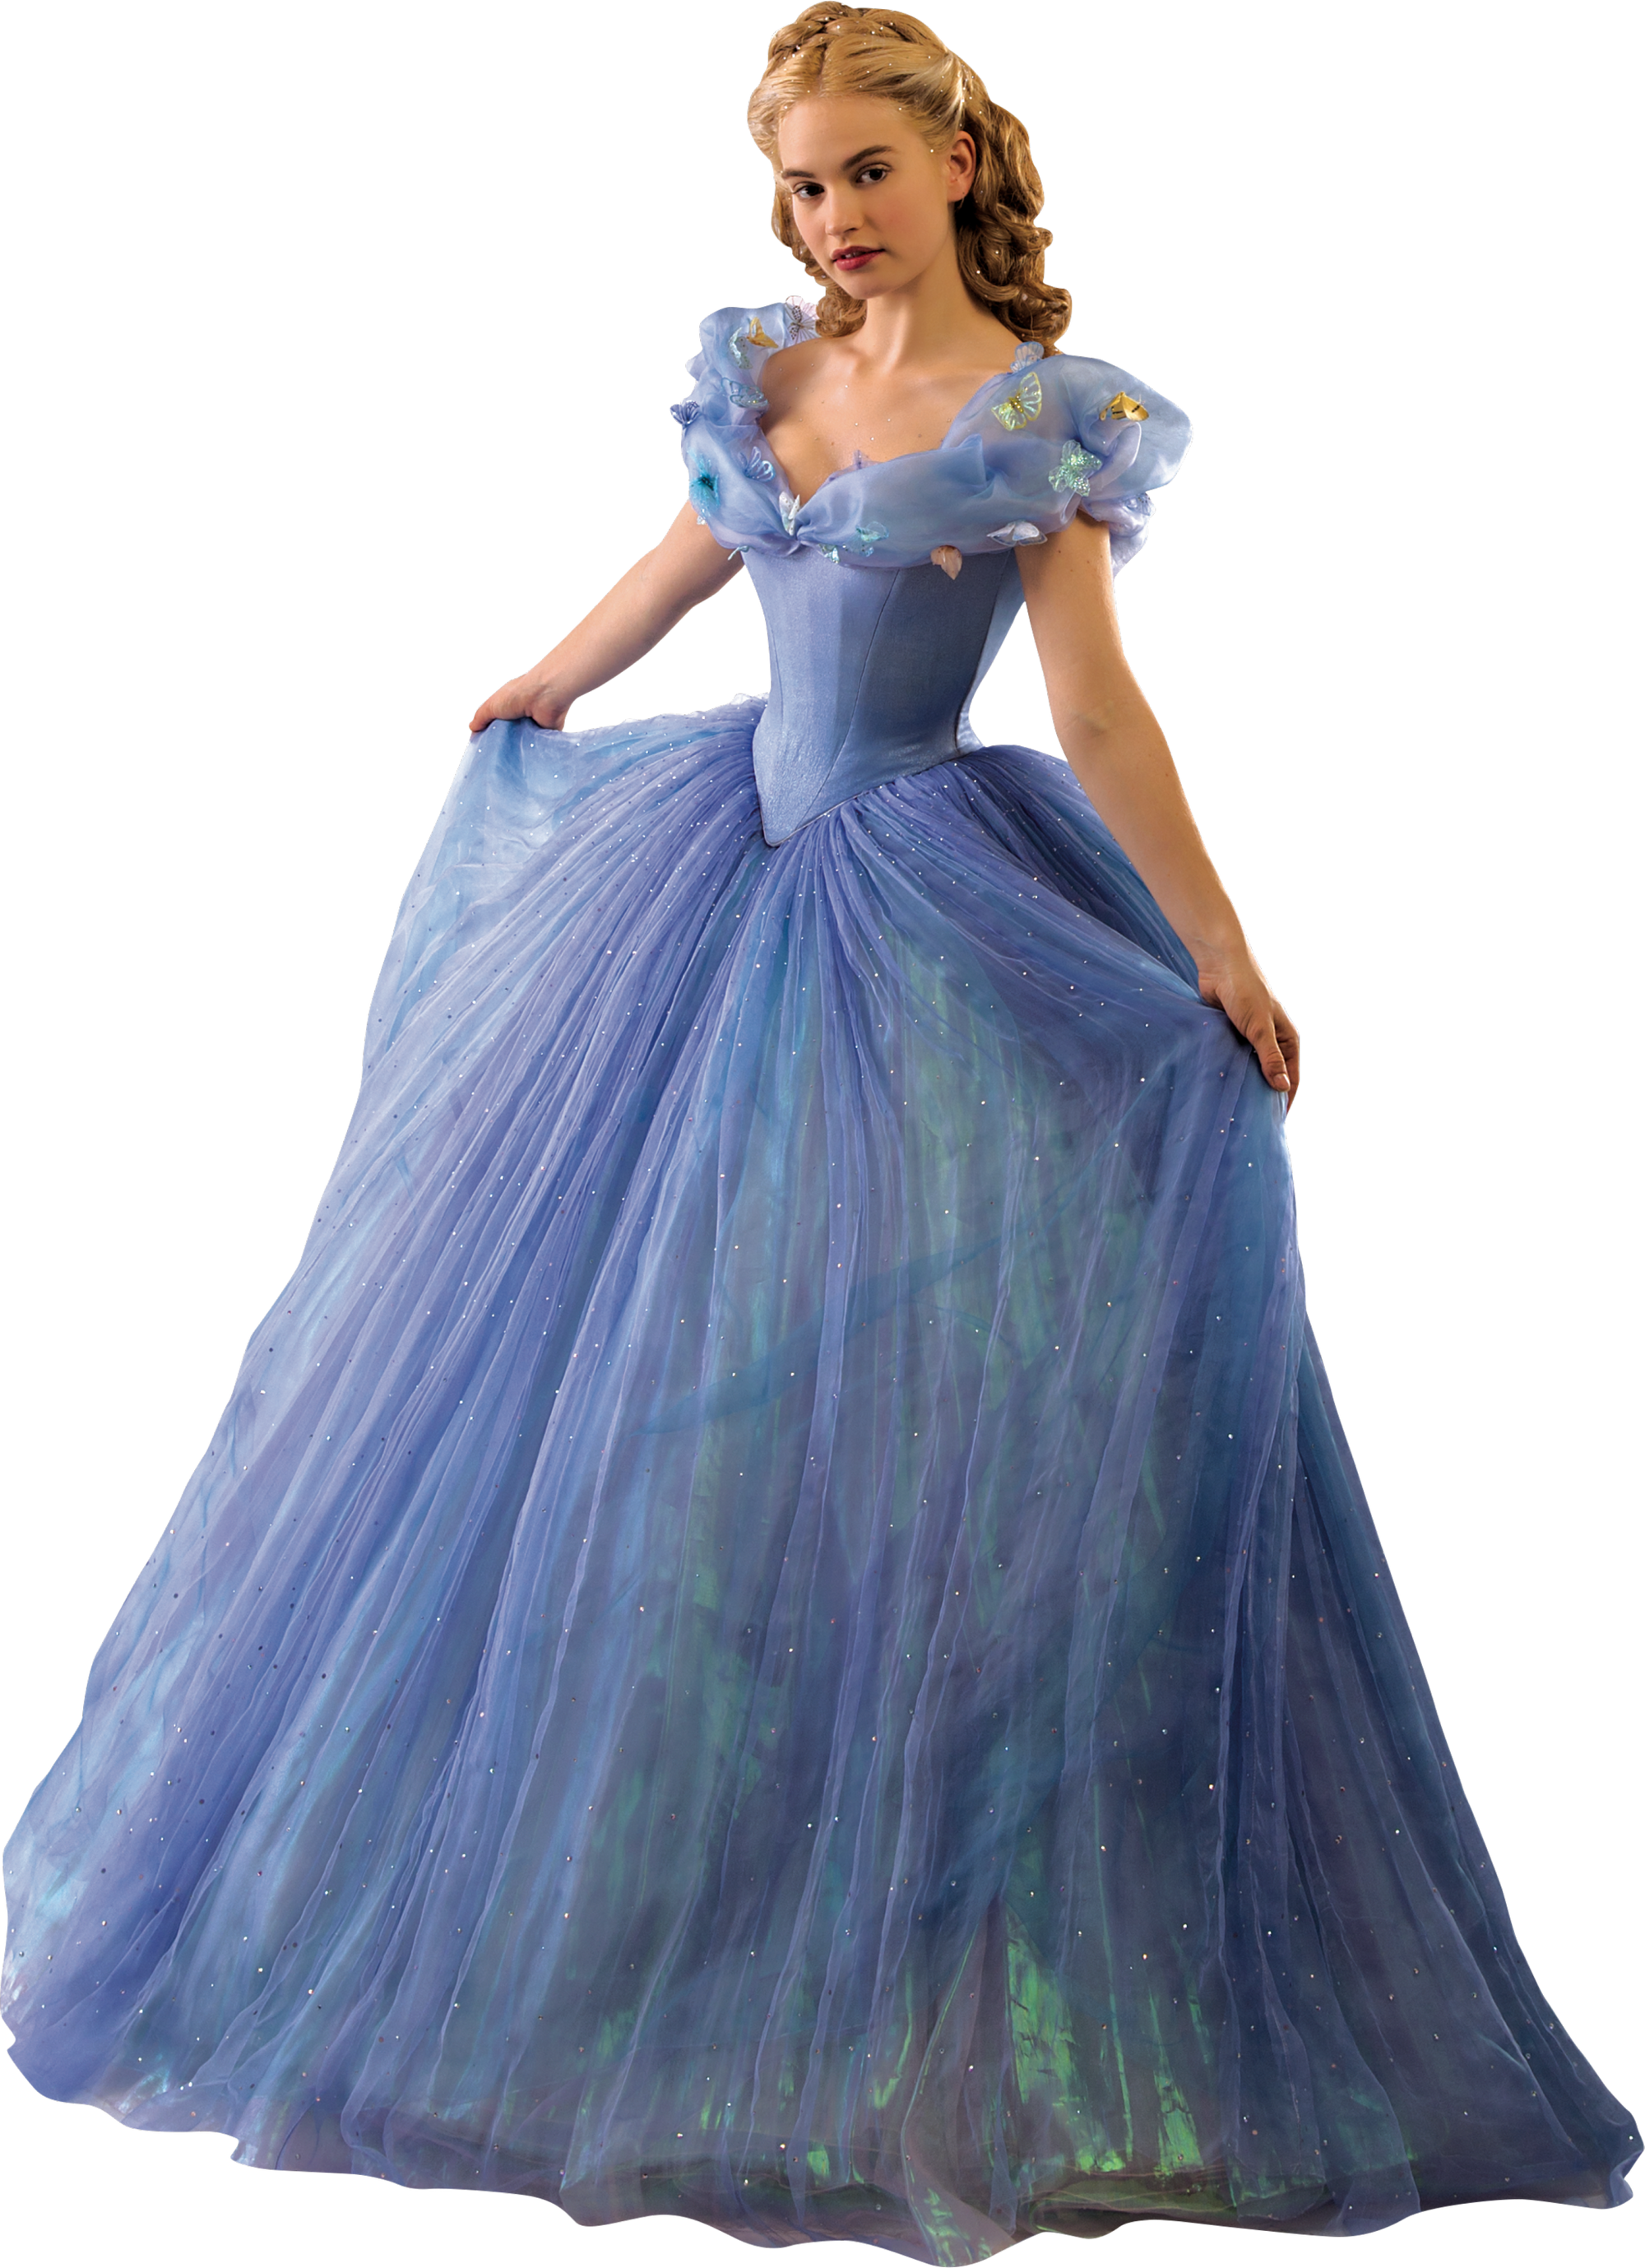 Cinderella 2015 Full Movie : Cinderella (2015) Full Movie Free Download ~ Extreme Free ... - This is a counterfeit movie;